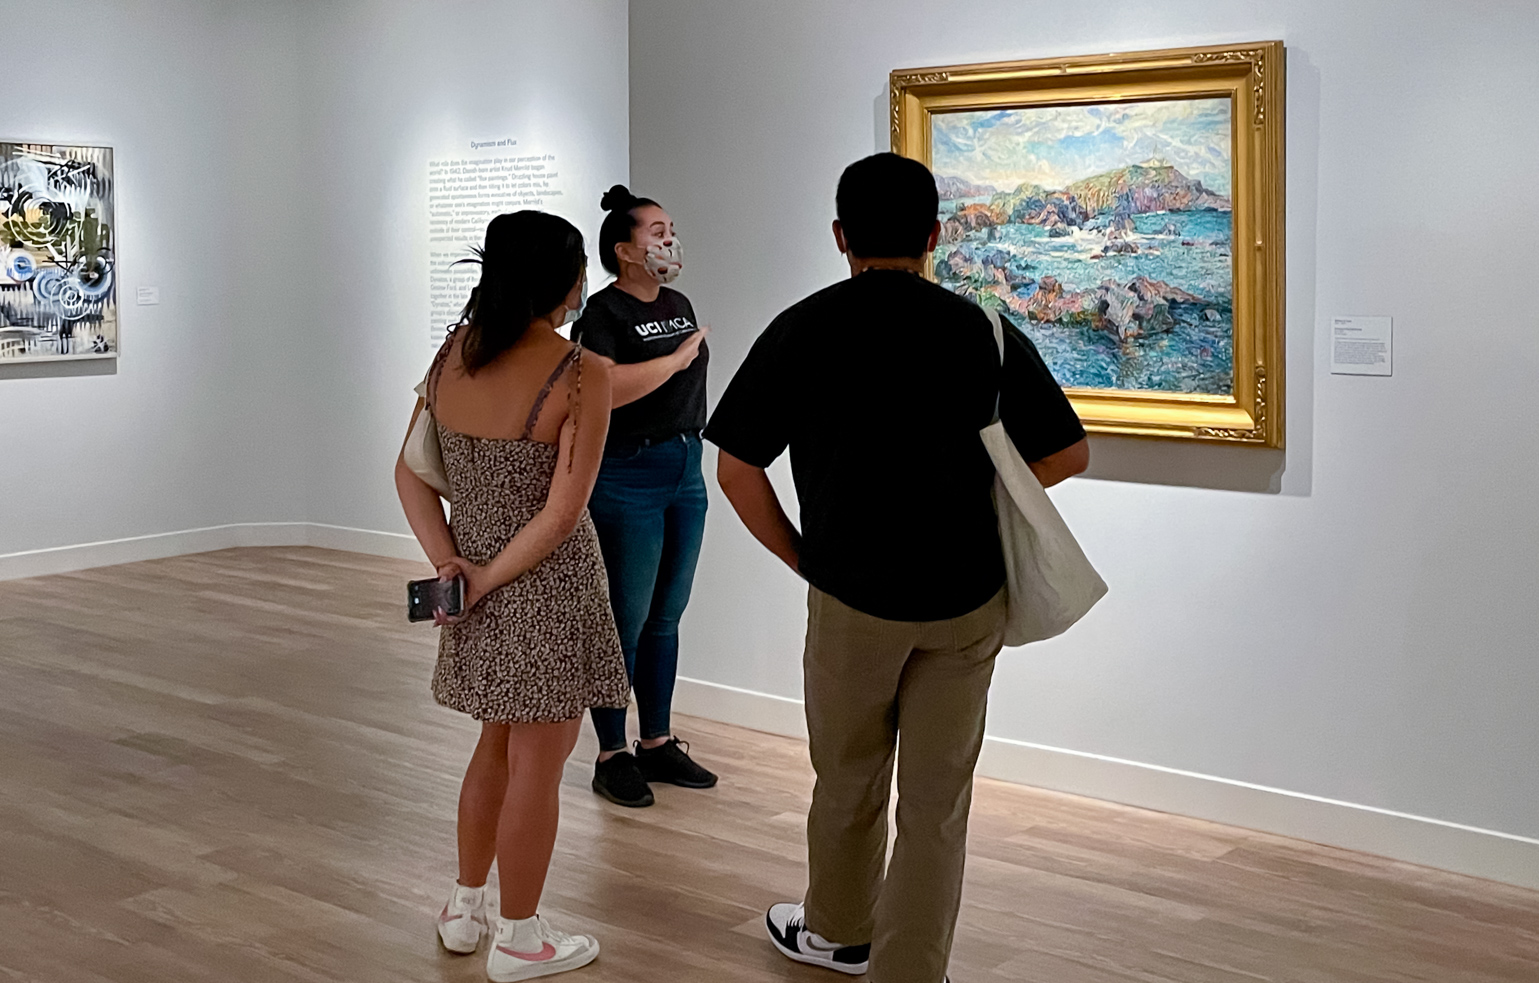 an IMCA gallery guide and two visitors discussing a painting in the museum